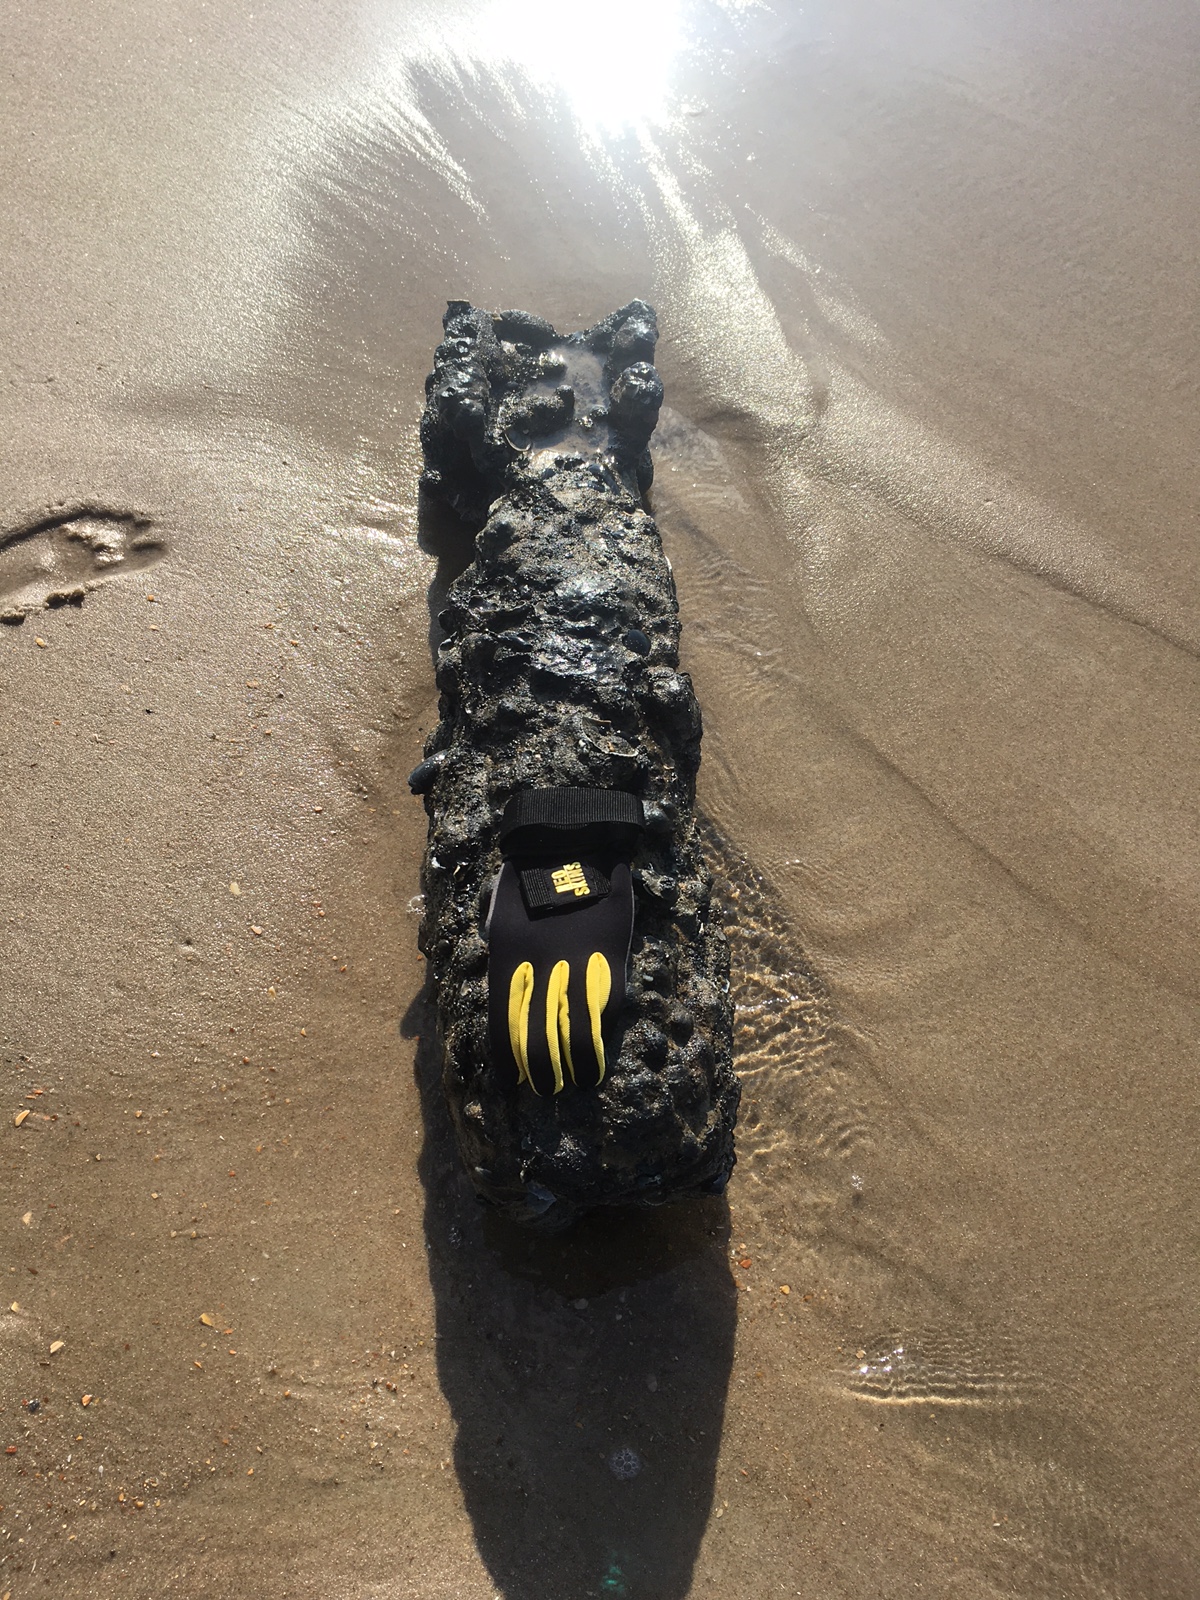 Photo of possible unidentified military device found on sandbar near Cape Point